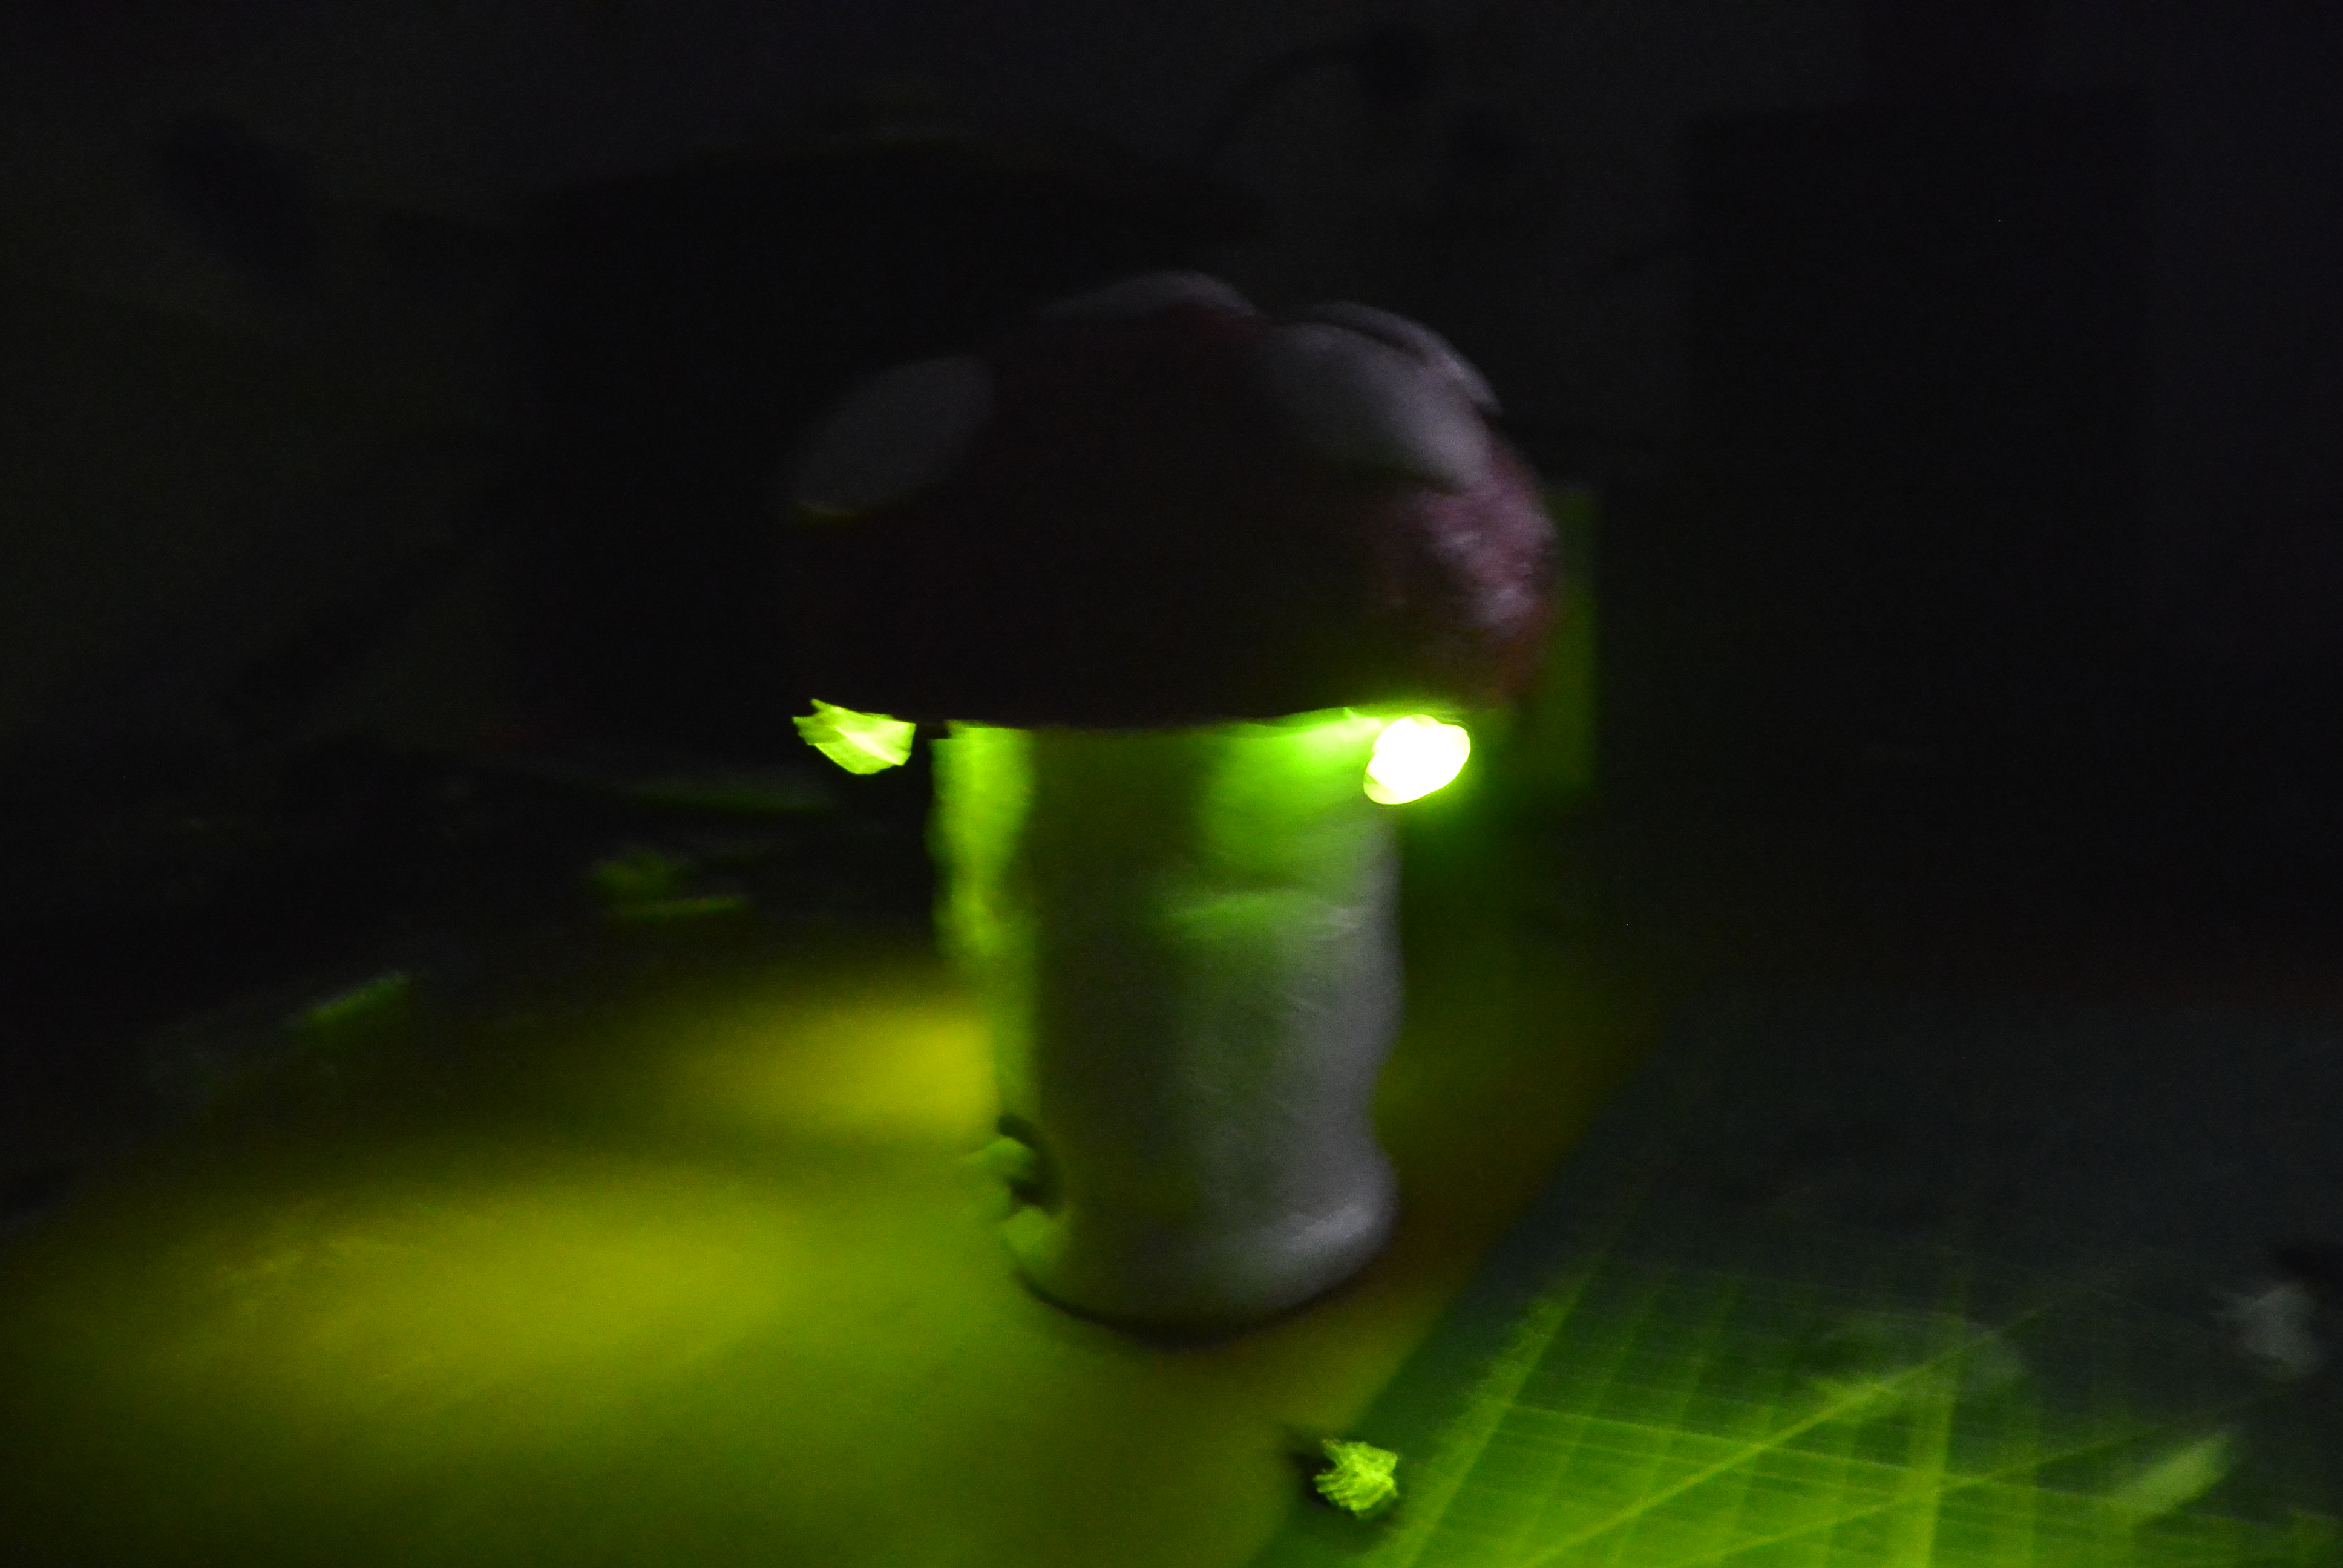 A picture a mushroom lamp finished